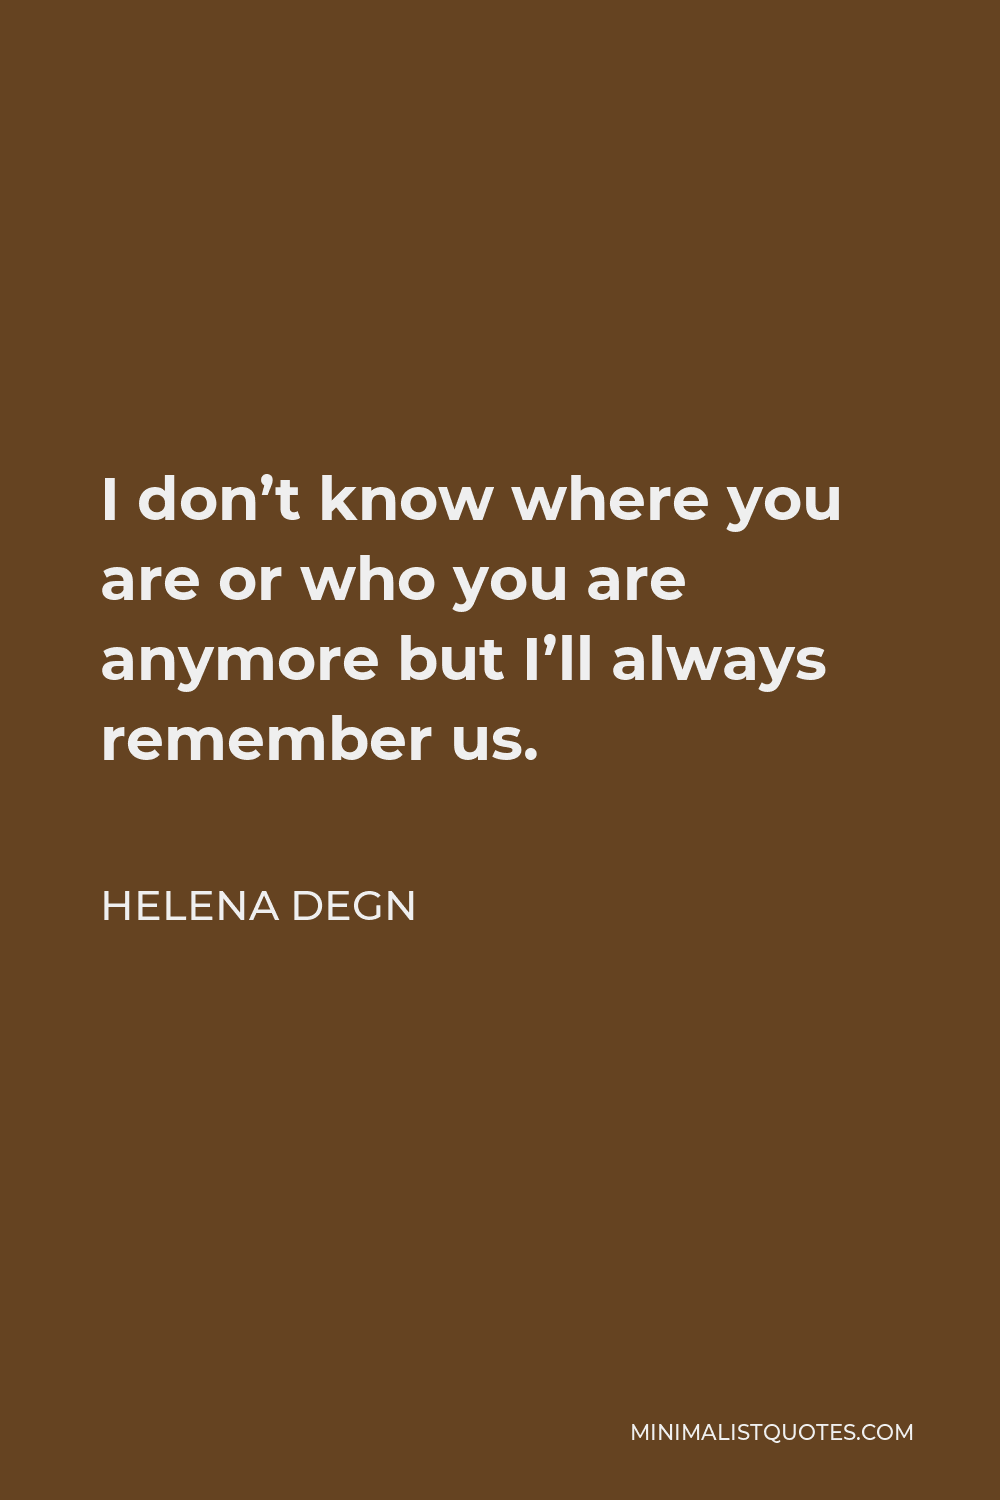 Helena Degn Quote - I don’t know where you are or who you are anymore but I’ll always remember us.